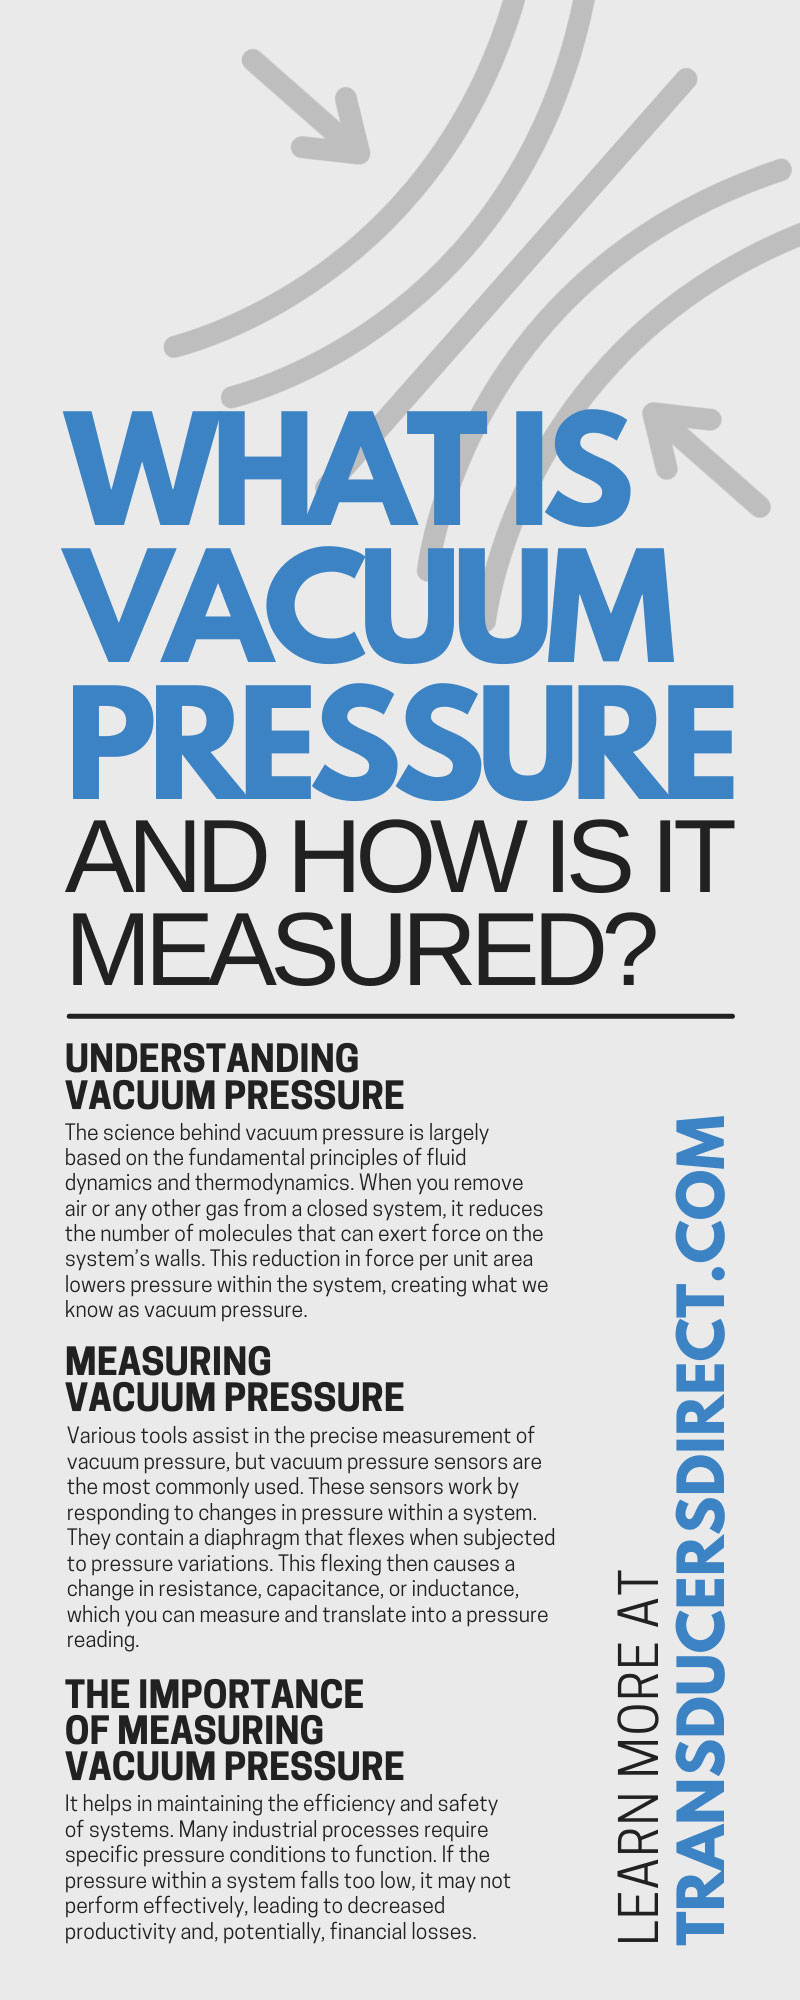 What Is Vacuum Pressure and How Is It Measured?